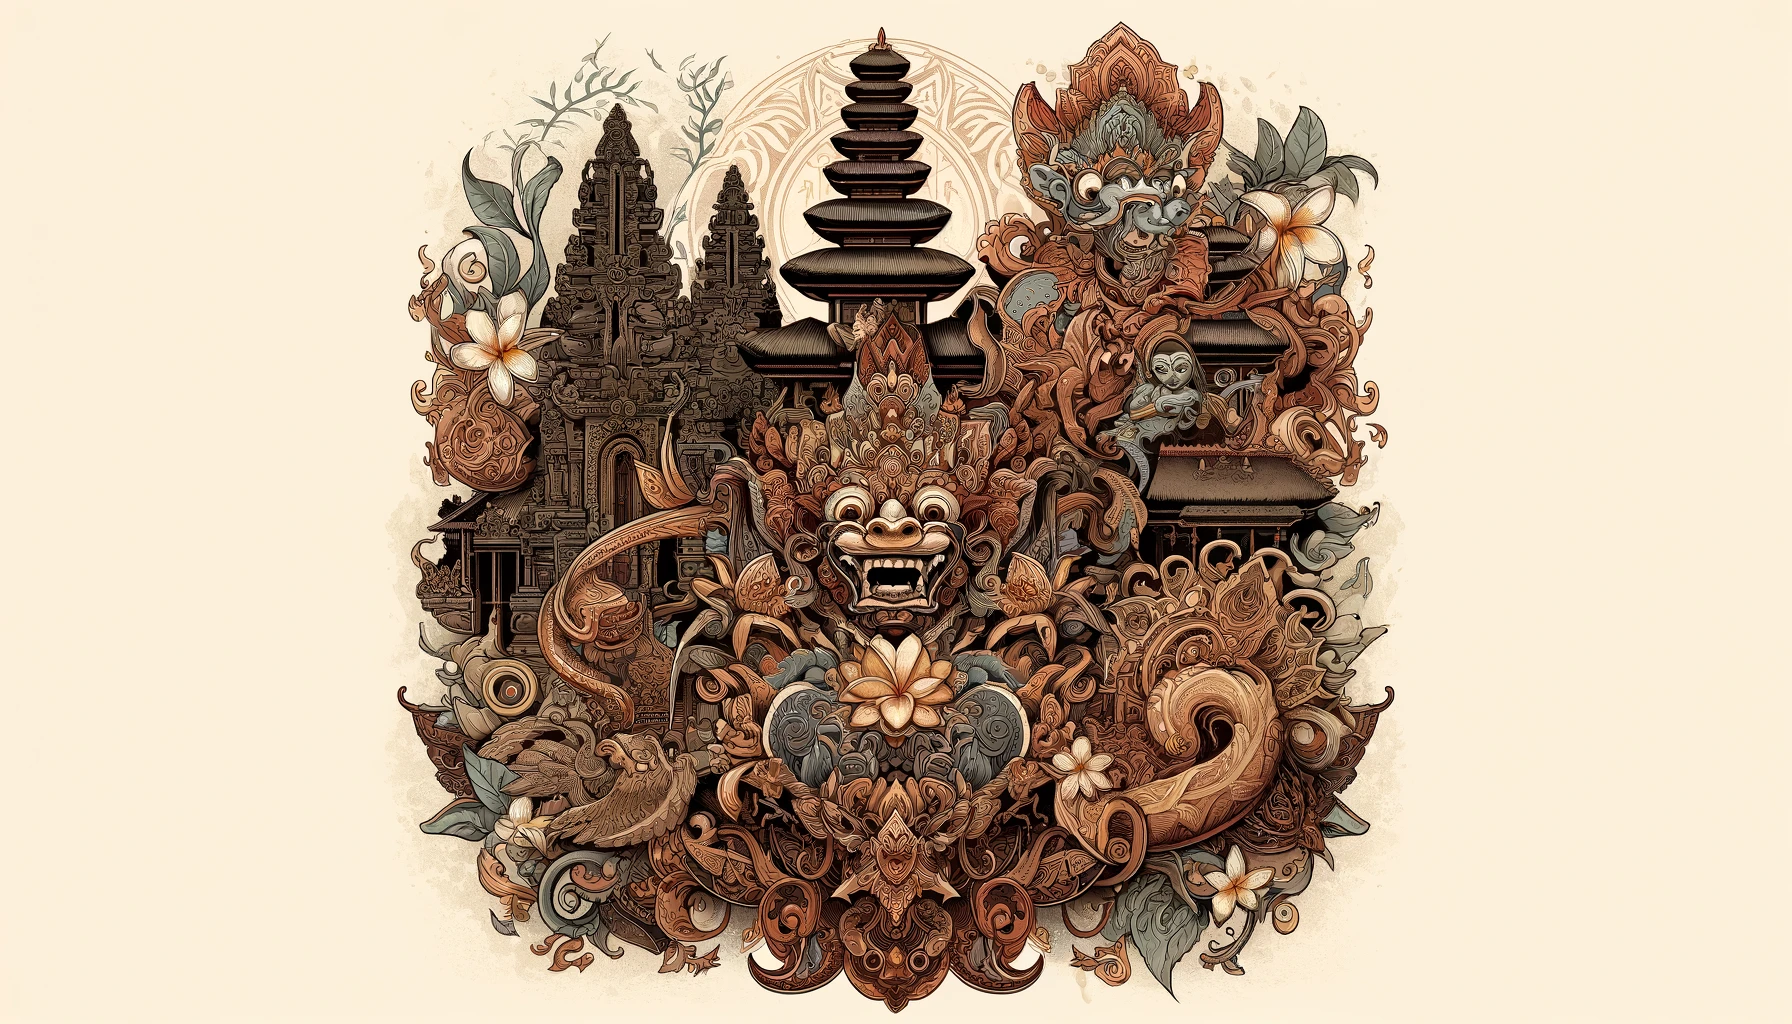 Artistic cover image showcasing the influence of Balinese art and architecture on tattoo designs. The image features intricate tattoo patterns inspired by elements like Balinese temple architecture, mythological figures Barong and Rangda, Wayang Kulit shadow puppets, and floral motifs such as lotus and frangipani.